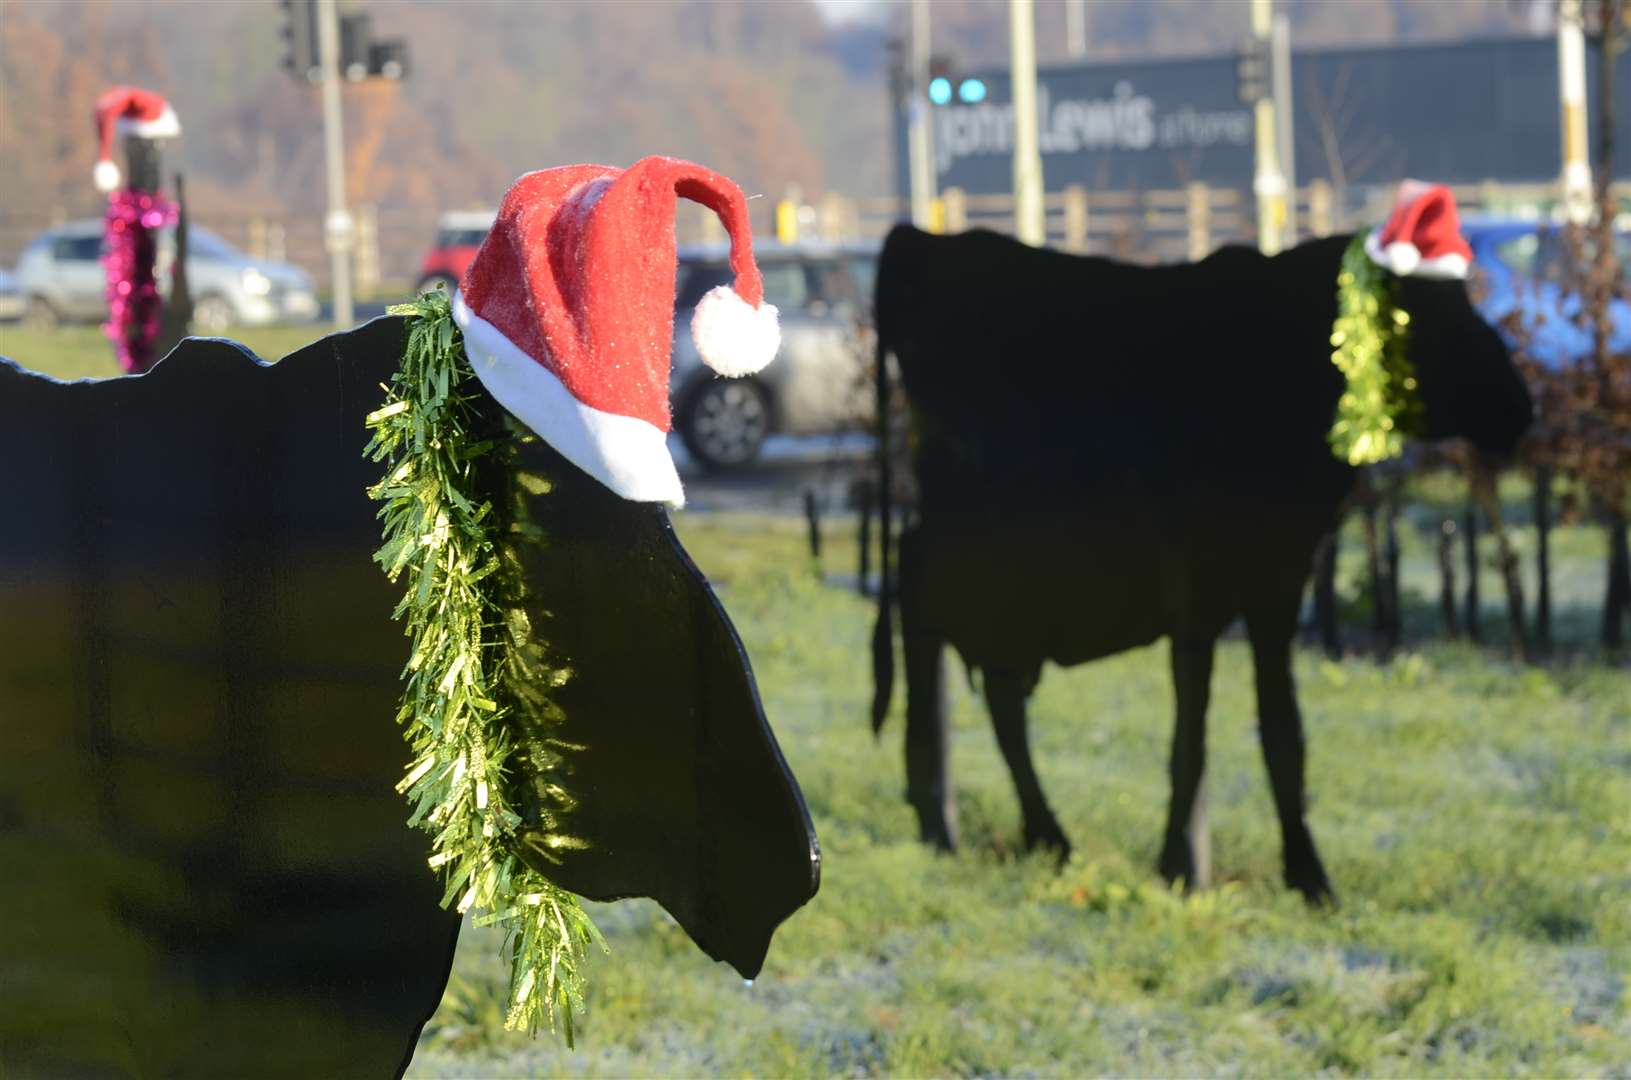 The Drovers Roundabout cows are regularly decorated by pranksters each Christmas